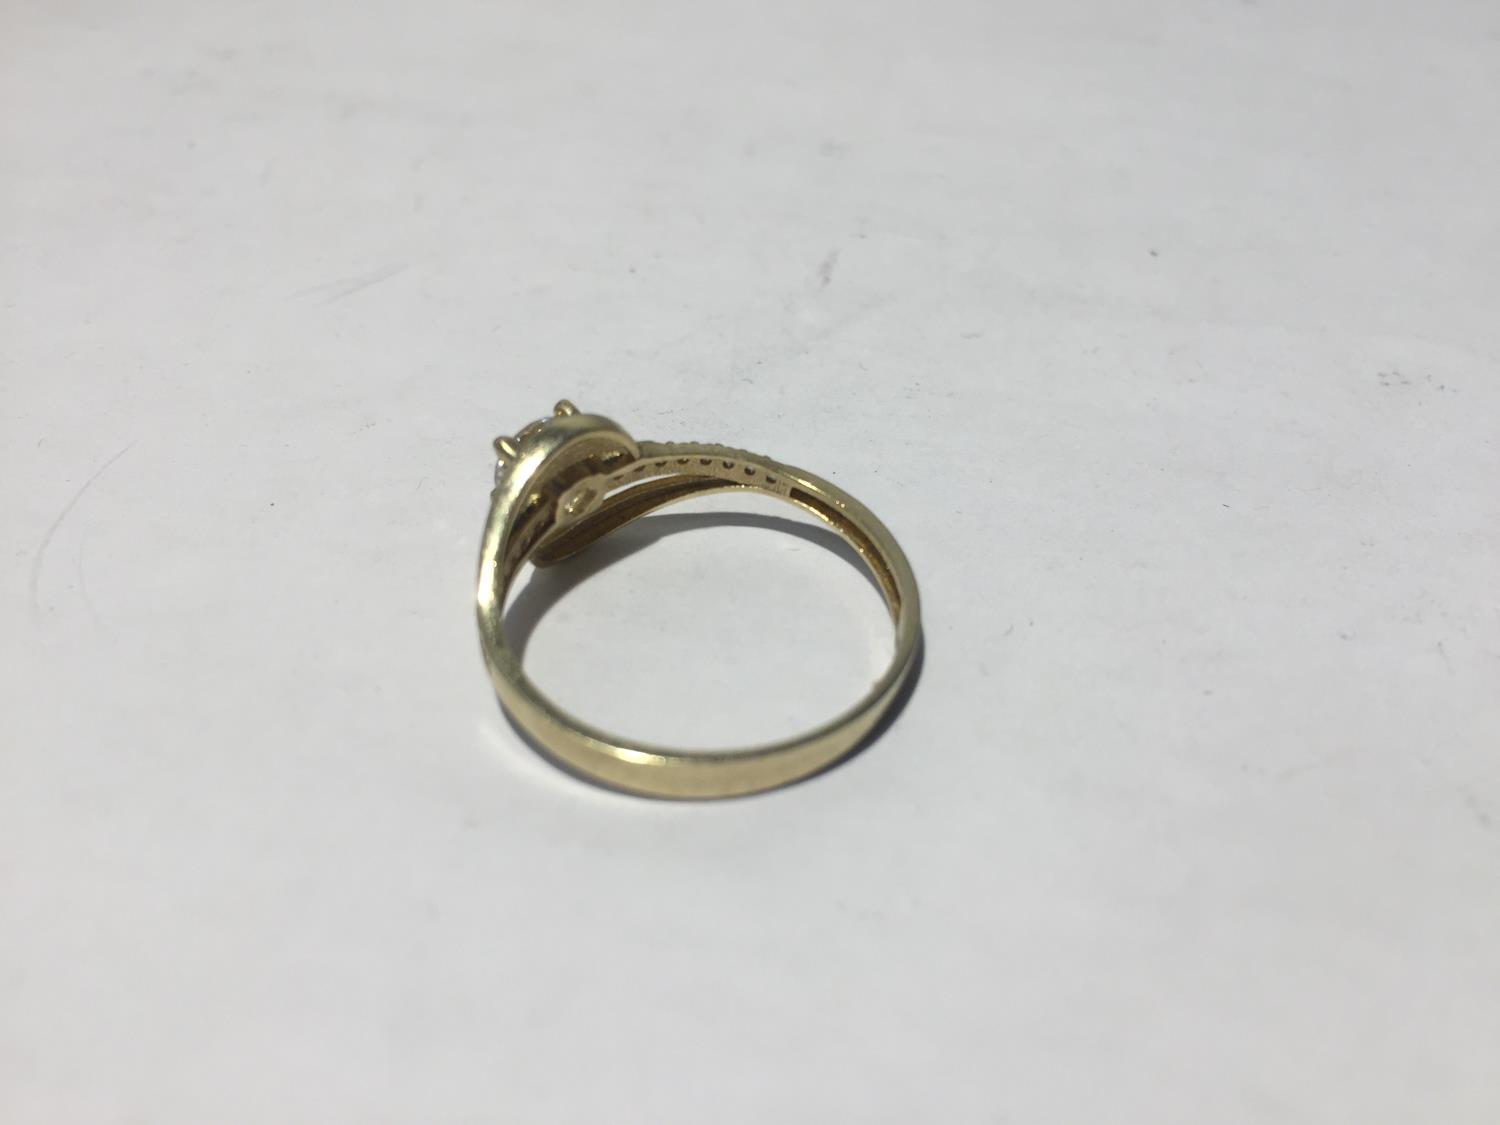 A 9 CARAT GOLD RING WITH A CLEAR STONE SOLITAIRE AND CLEAR STONES ON THE SHOULDERS WITH PRESENTATION - Image 3 of 4